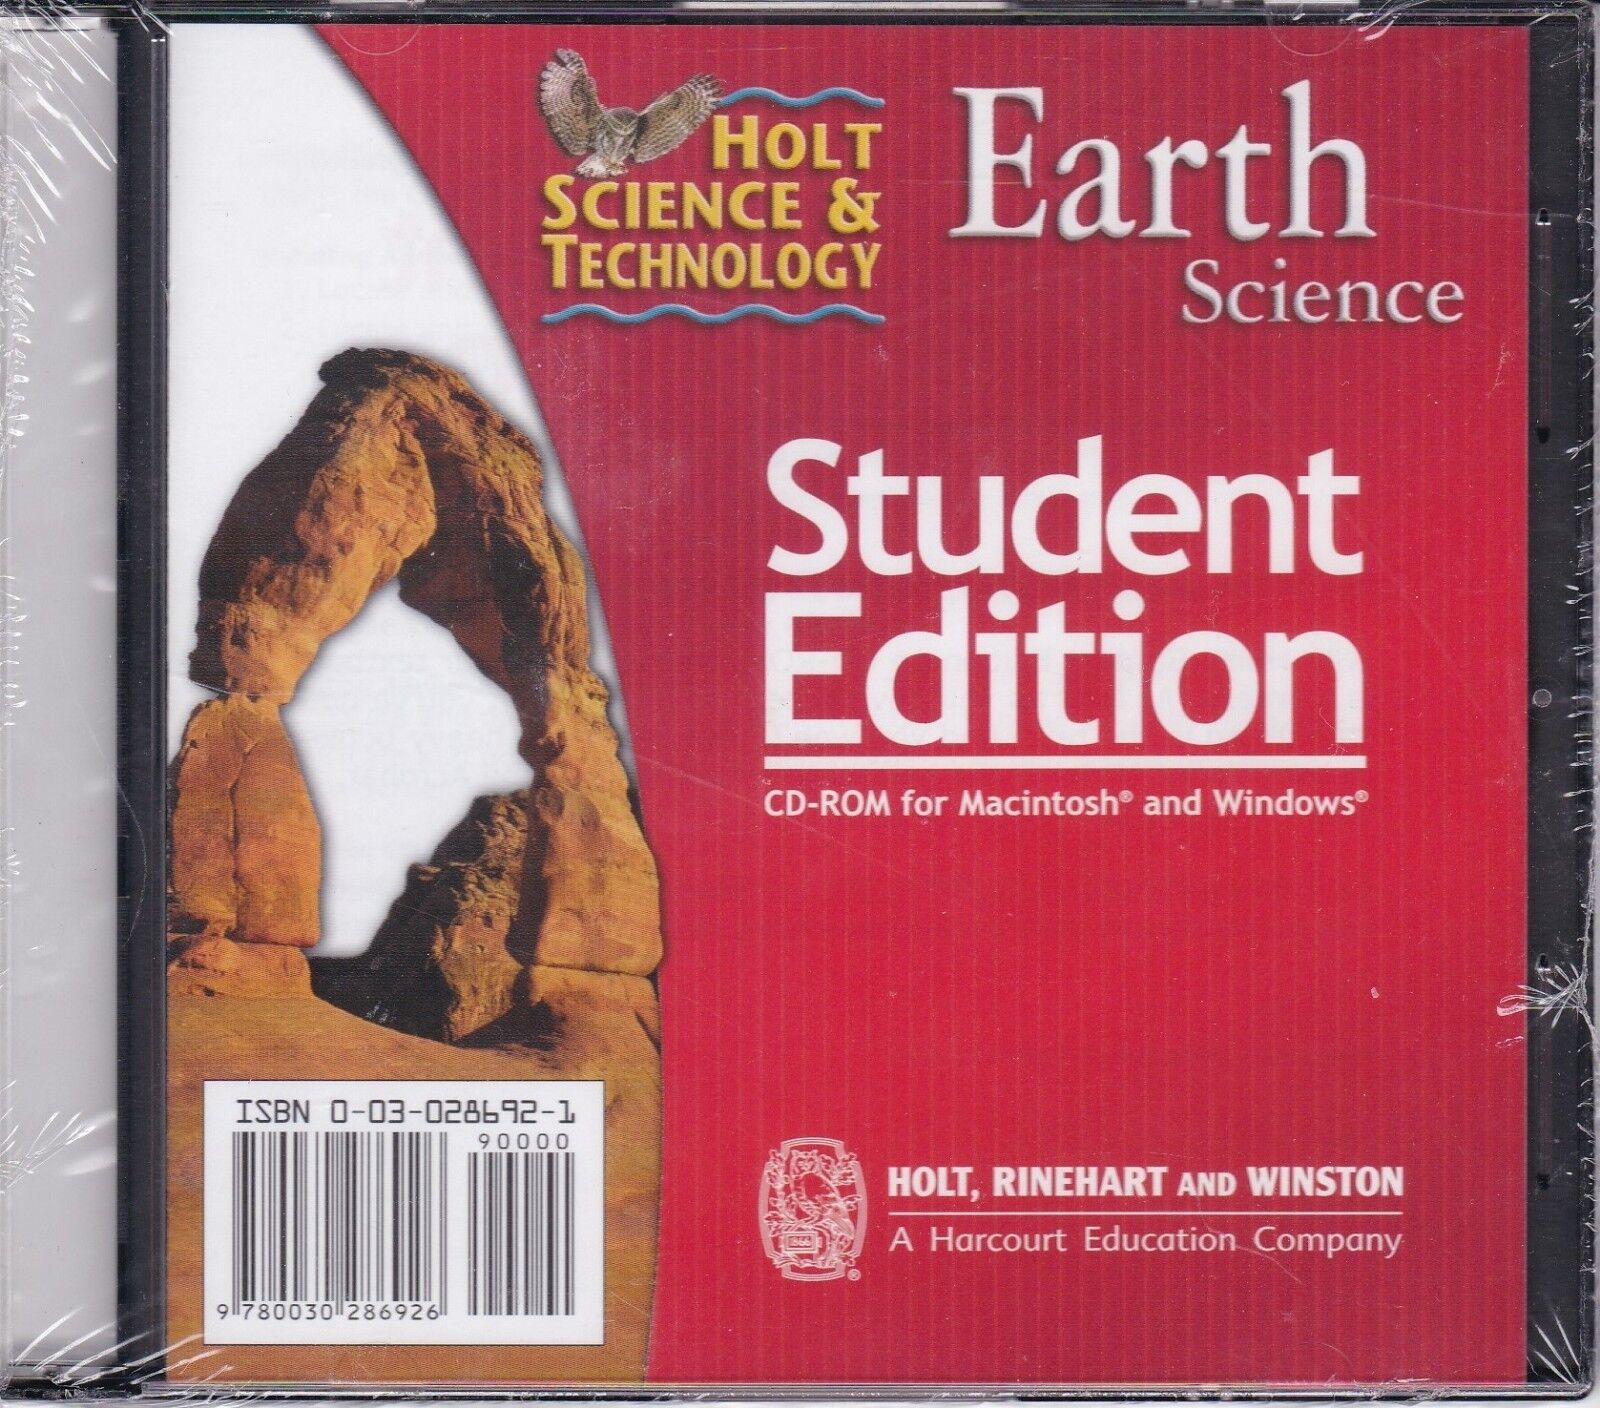 Holt Science & Technology Earth Science Student Edition PC CD-ROM *NEW* Vintage